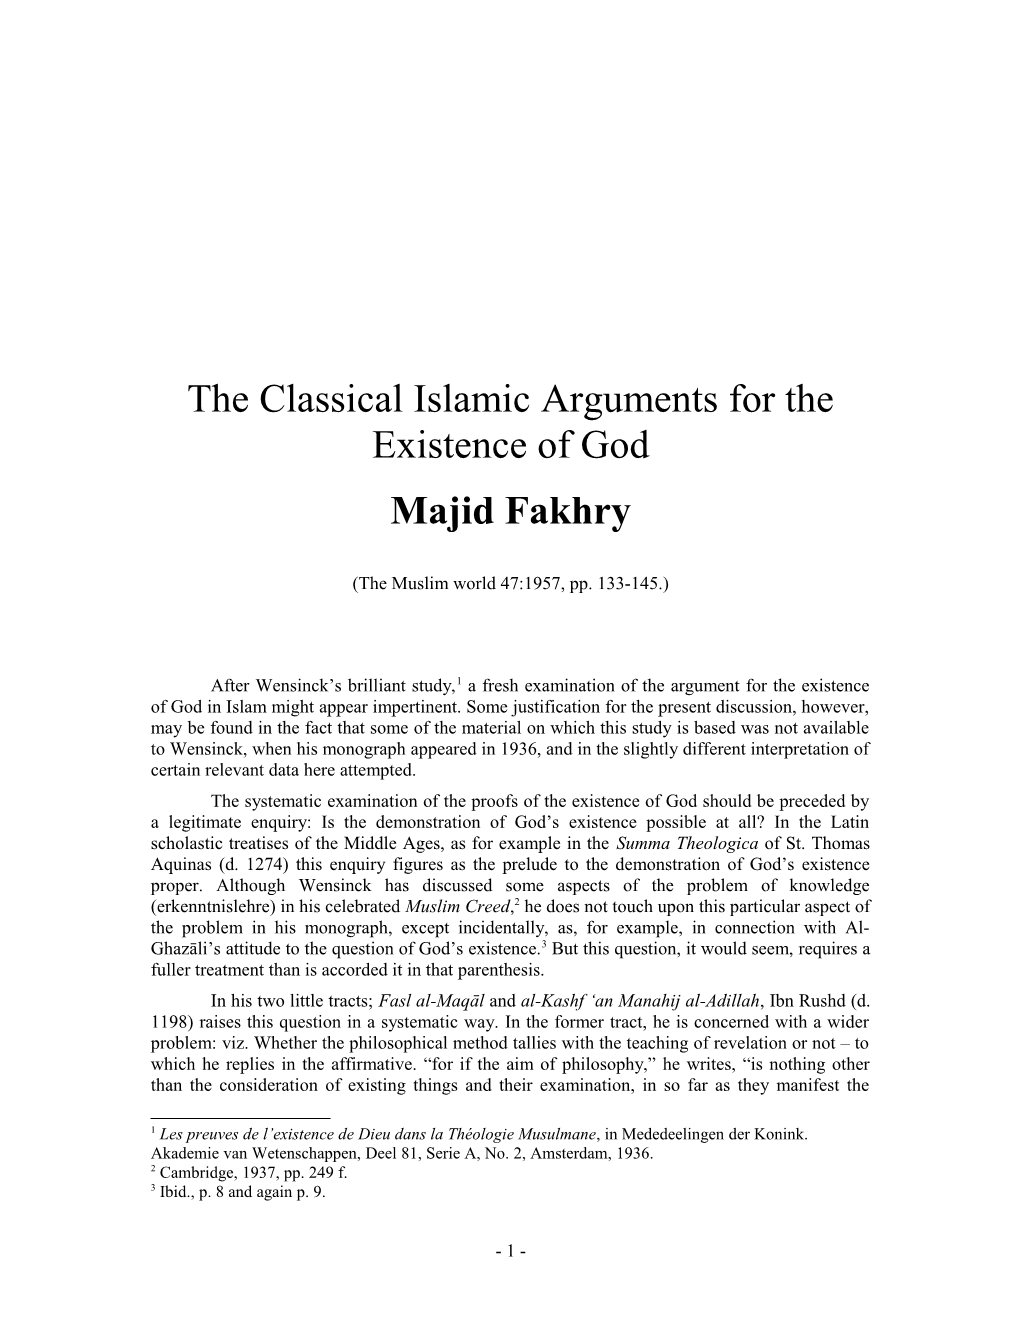 Classical Islamic Arguments for the Existence of God